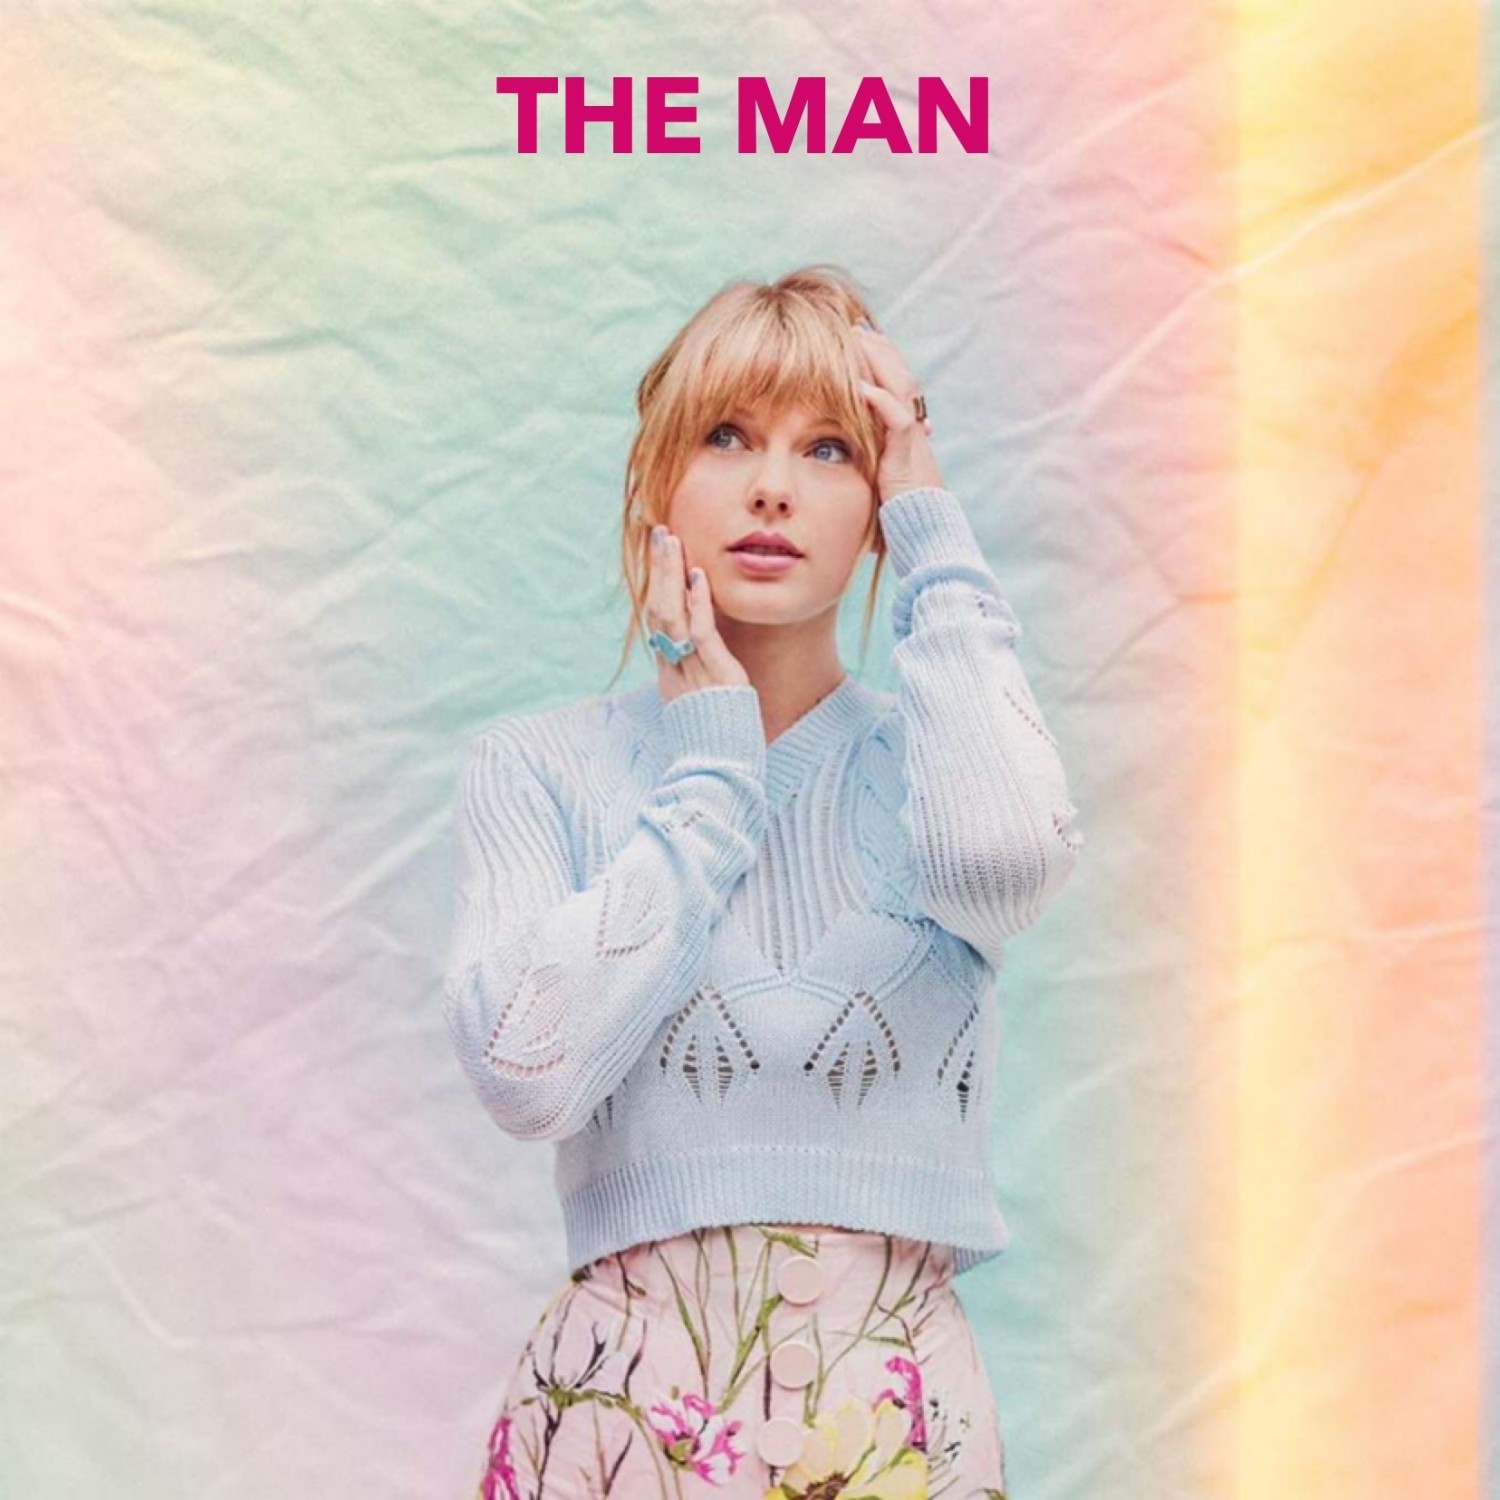 essay about the man by taylor swift